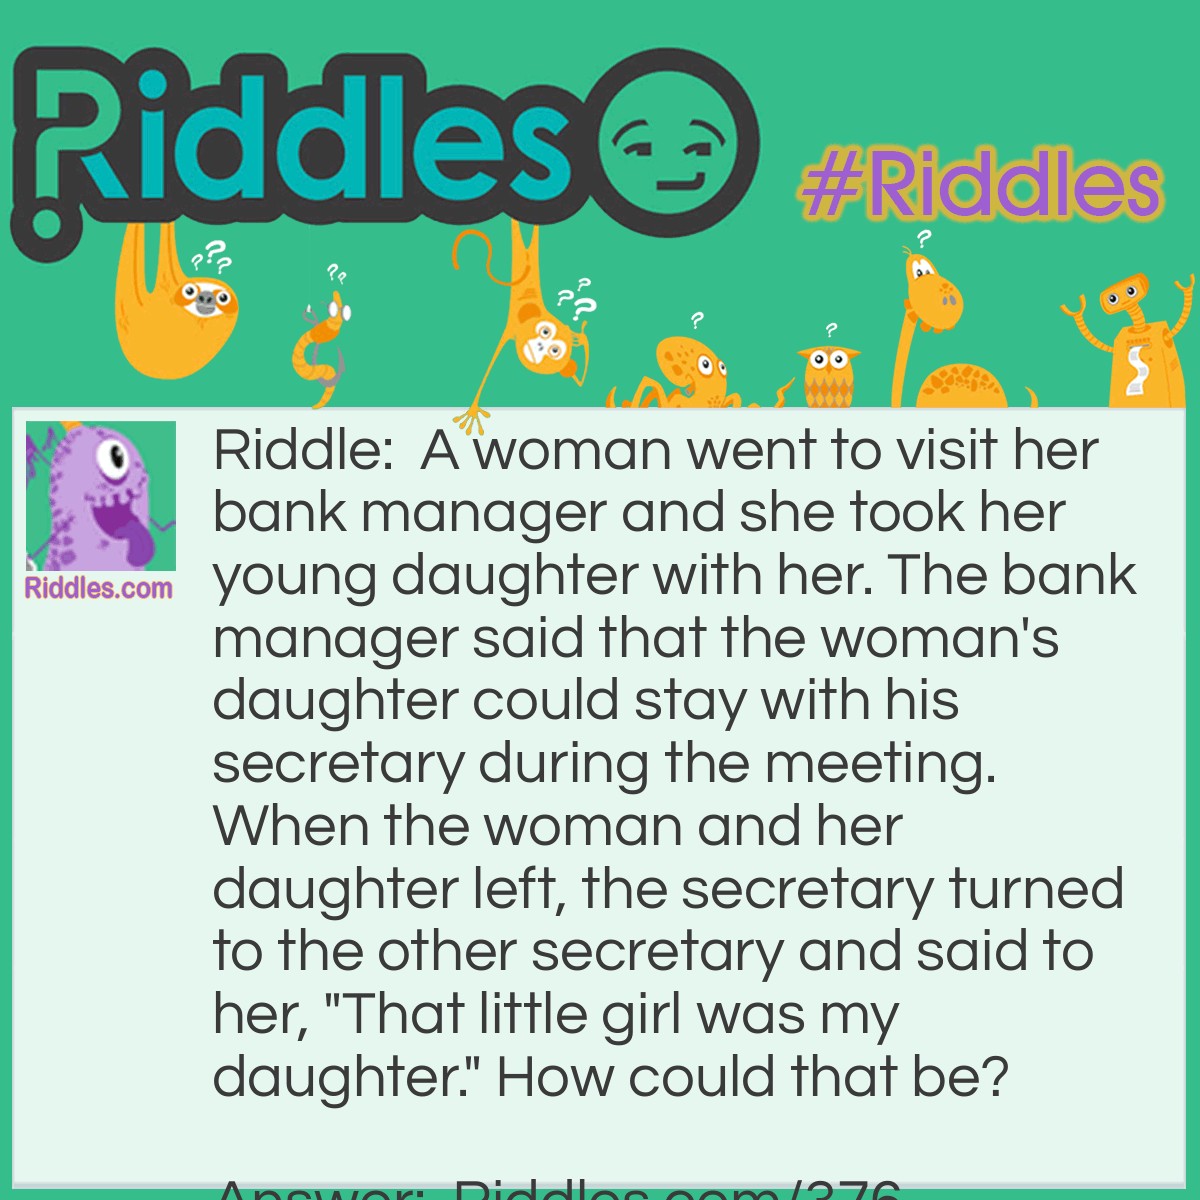 Riddle: A woman went to visit her bank manager and she took her young daughter with her. The bank manager said that the woman's daughter could stay with his secretary during the meeting. When the woman and her daughter left, the secretary turned to the other secretary and said to her, "That little girl was my daughter." How could that be? Answer: The secretary was the girl's father.